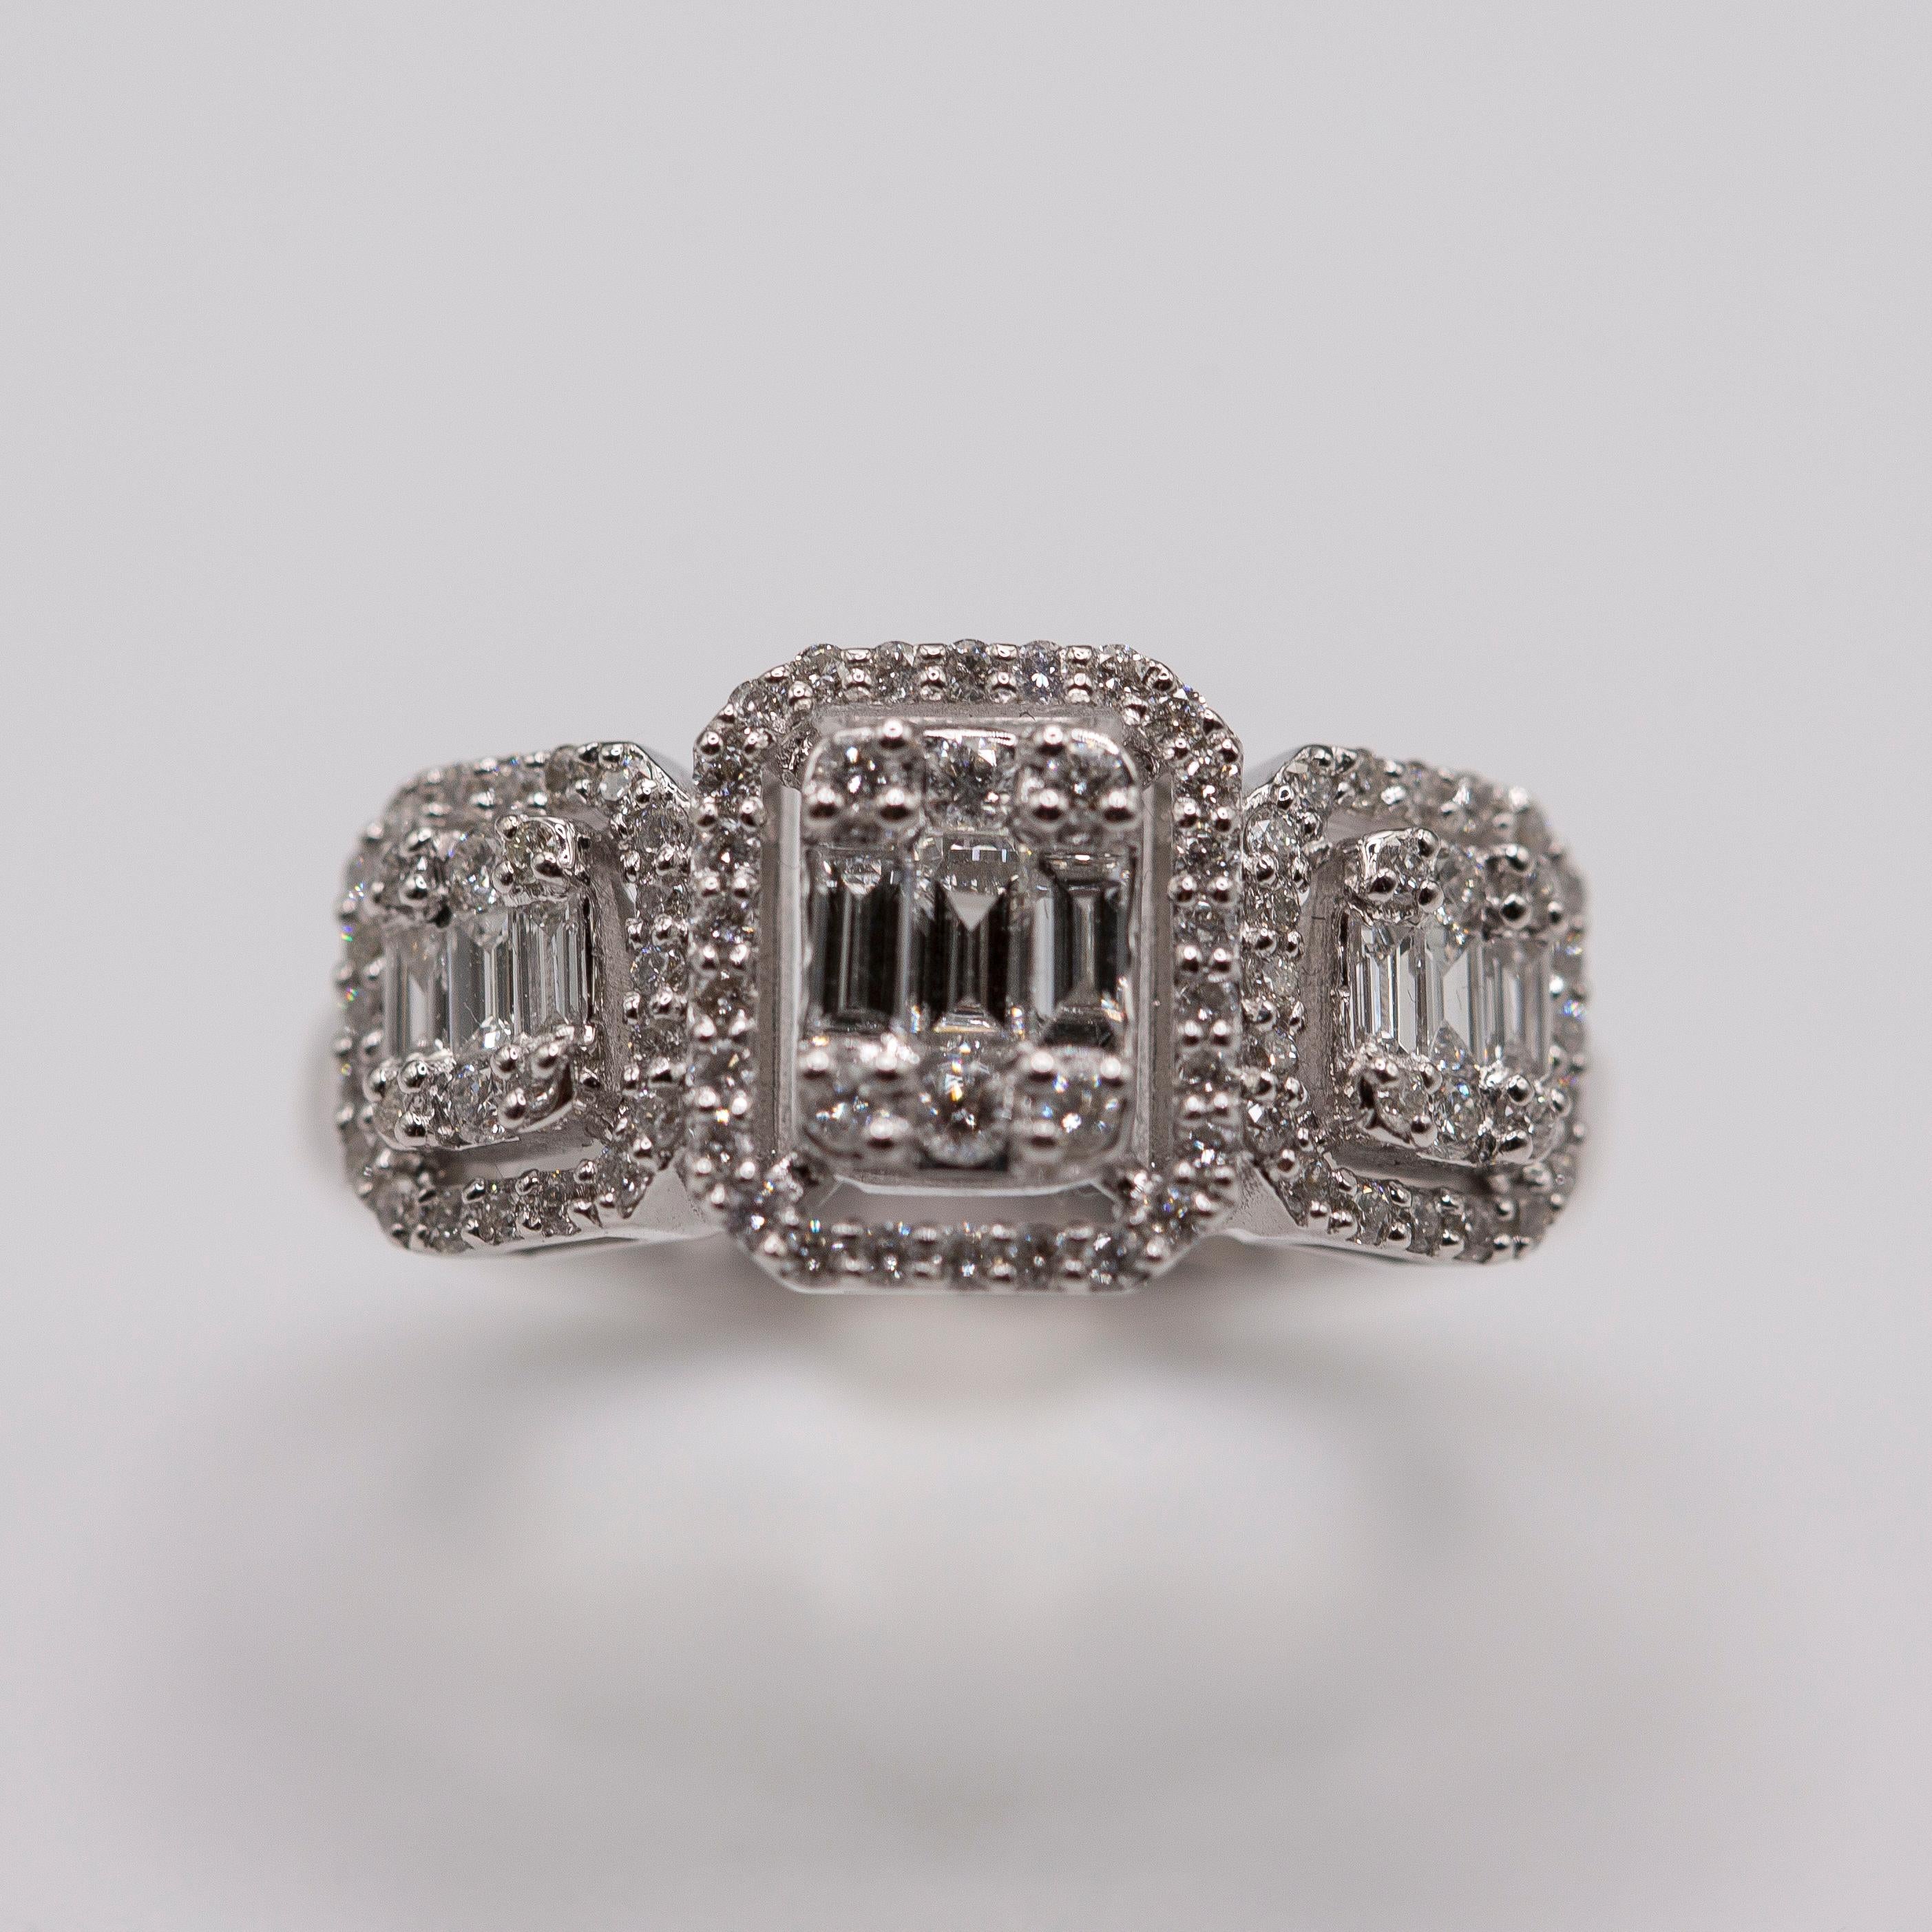 14k white gold channel set diamond ring with baguette diamonds and channel set diamonds.